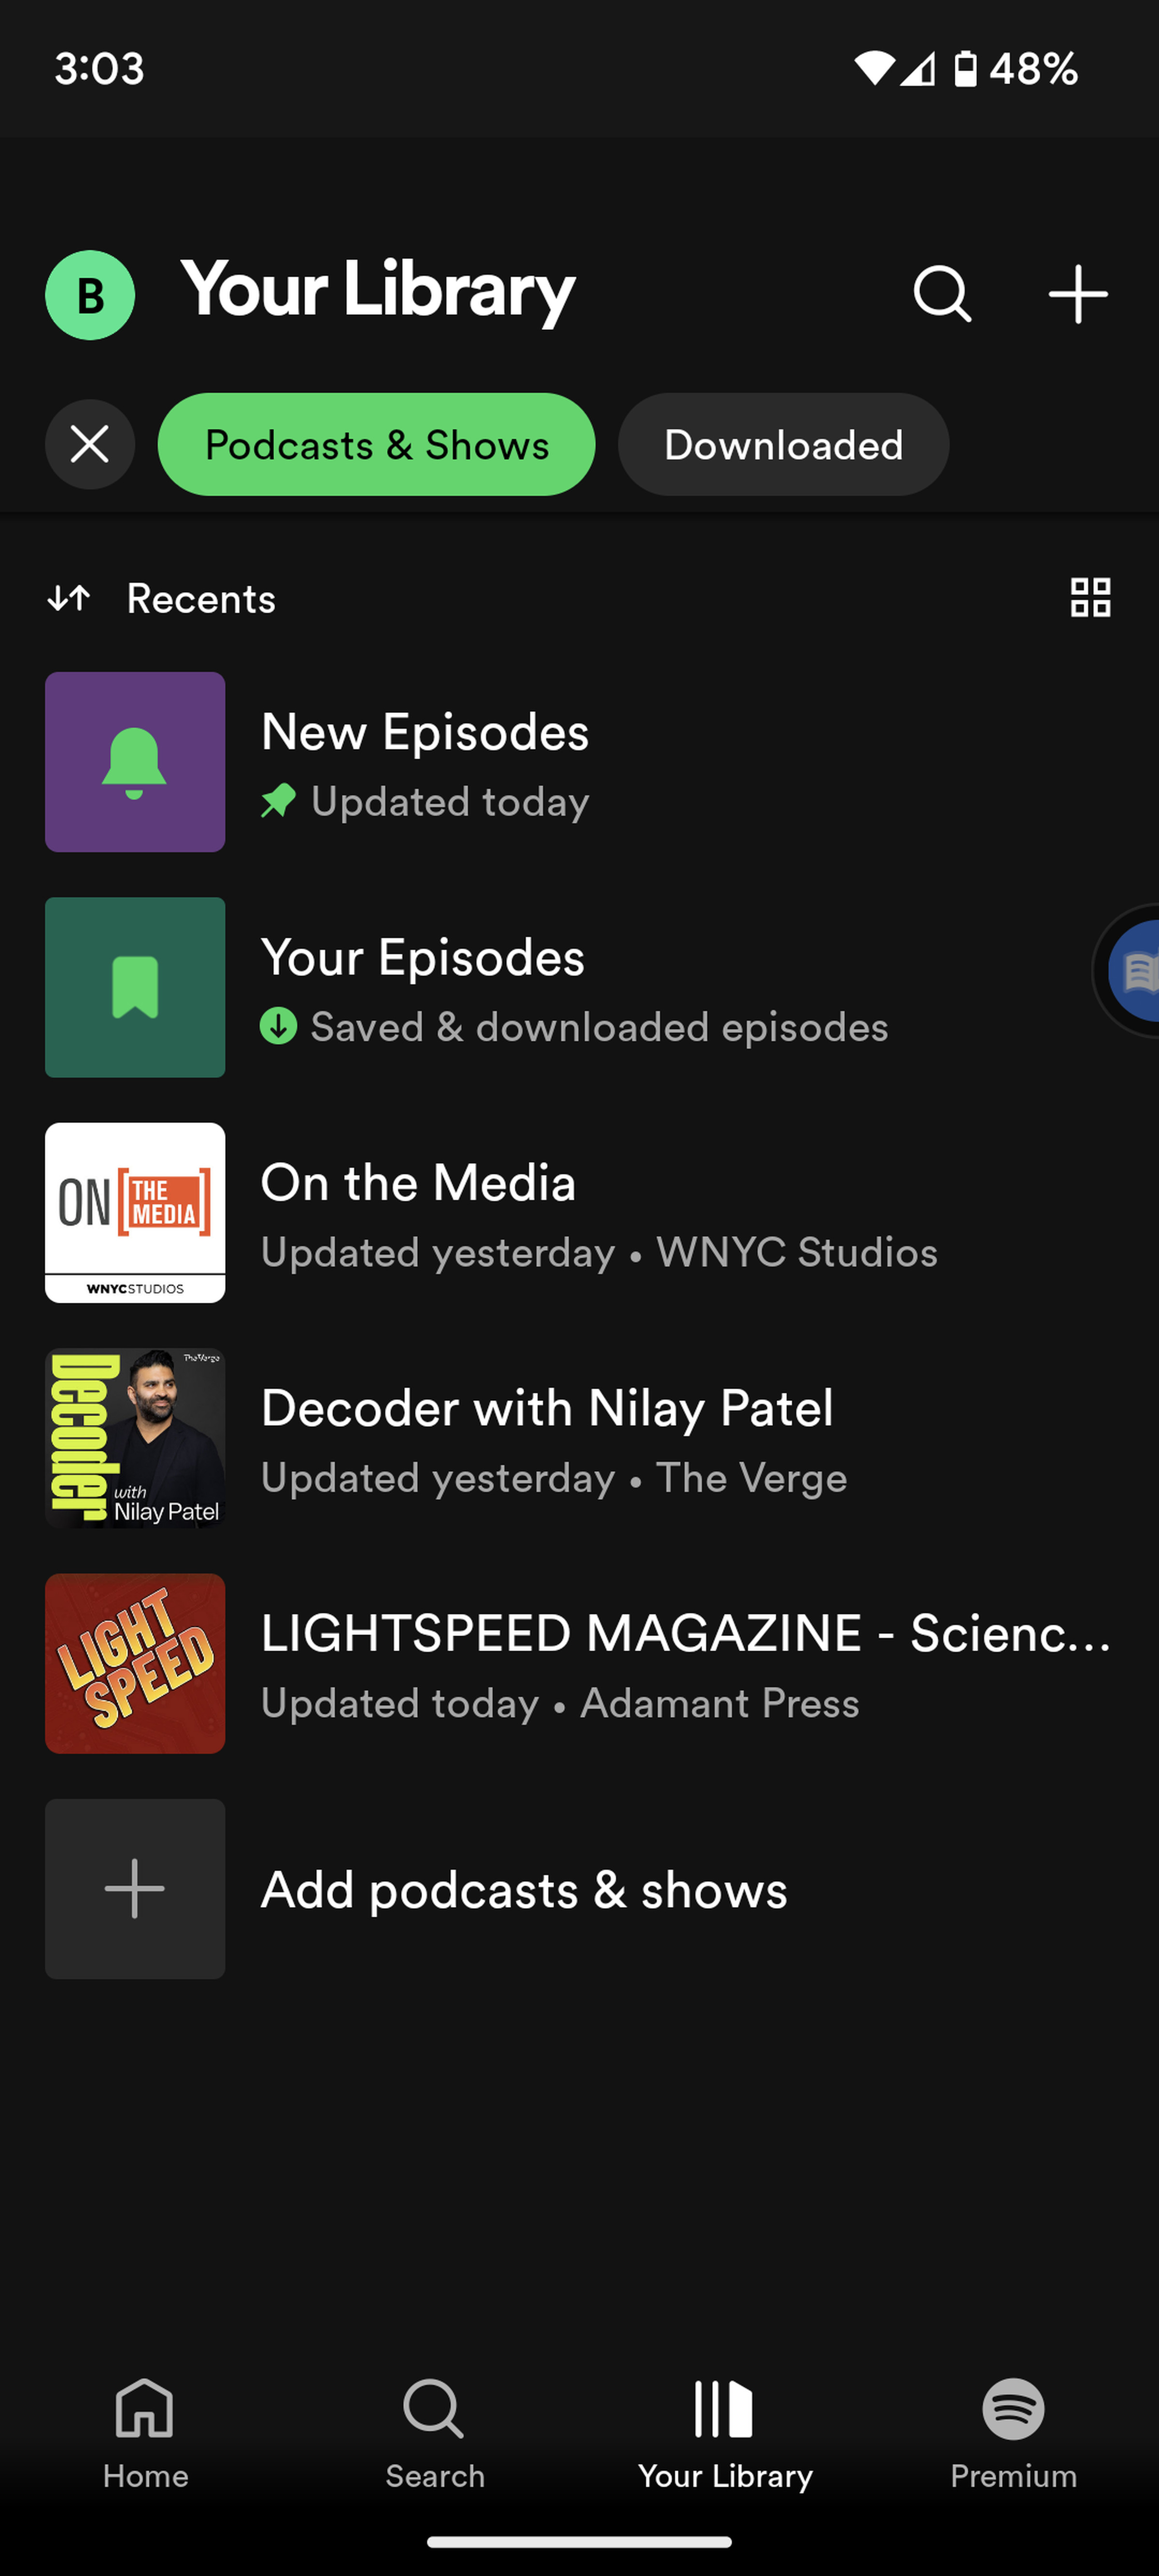 Page headed Your Library with highlighted button Podcasts &amp; Shows, and a listing of podcasts beneath.